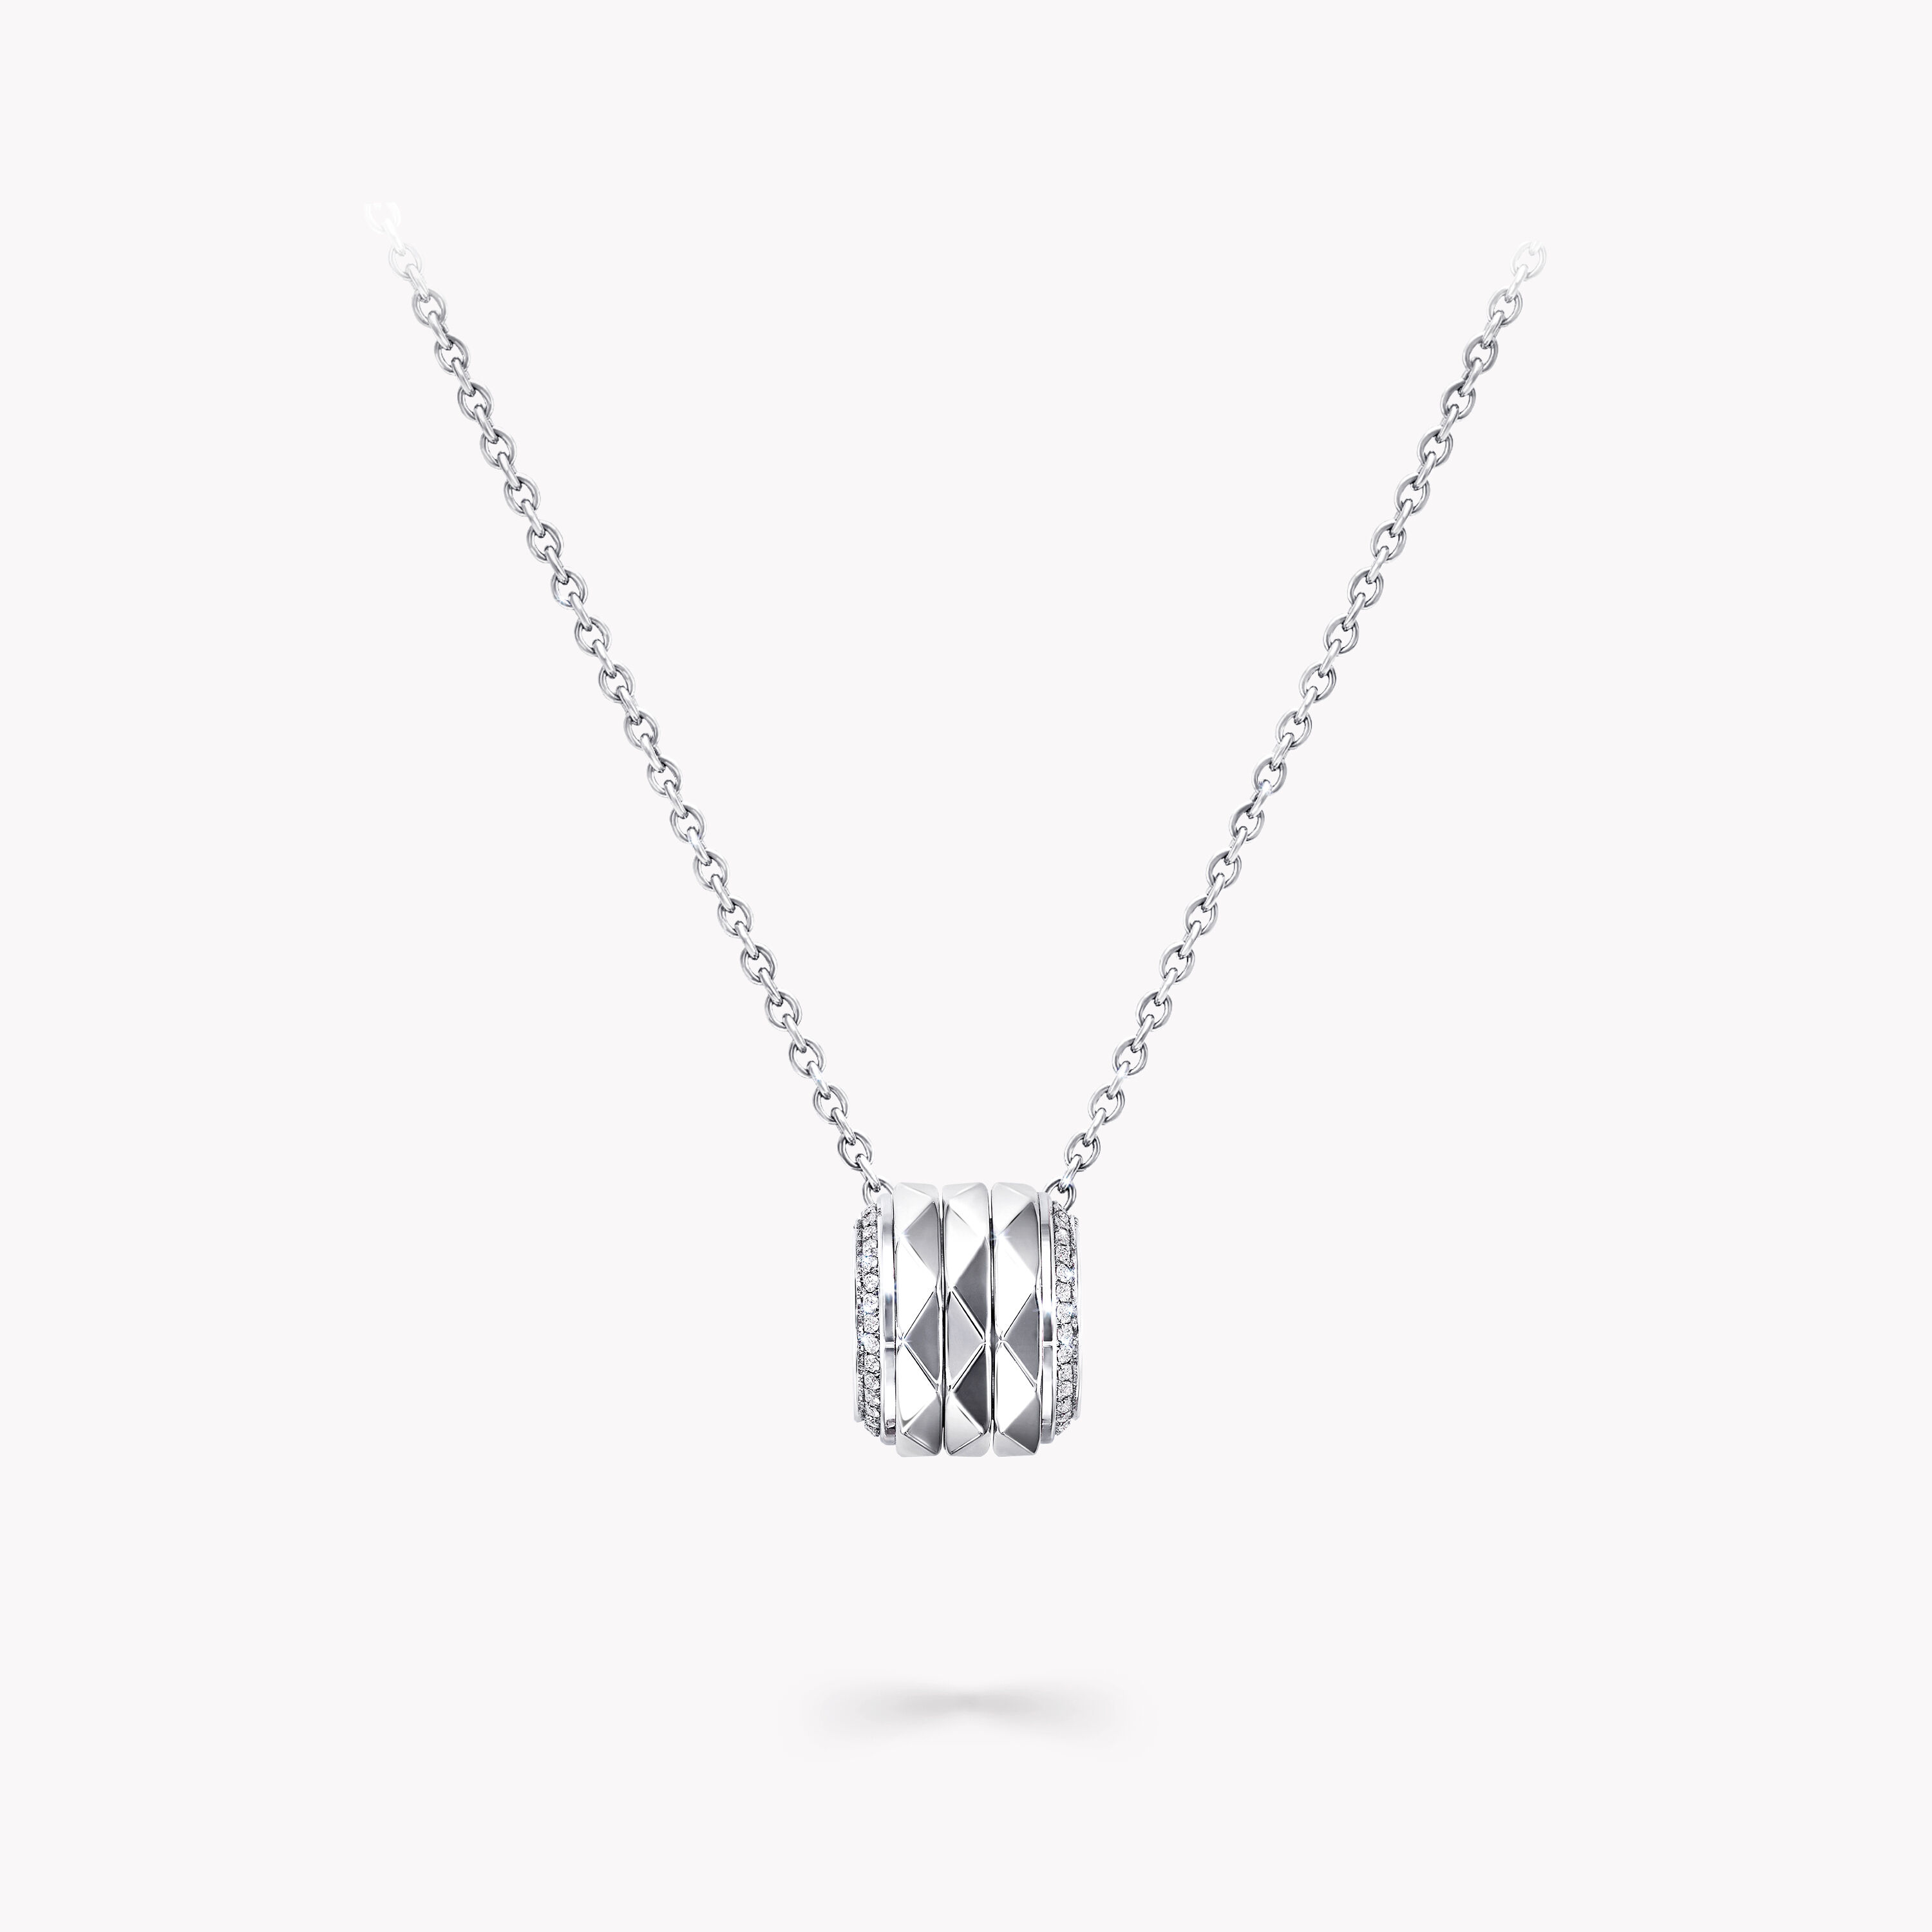 GUIYING Custom Iced Out Spinning Pendant Chain Hip Hop Rotating Necklace  Silver/Gold Plated Fully CZ Necklace for Men Women-Personalized with  Initial Letters or Numbers | Amazon.com